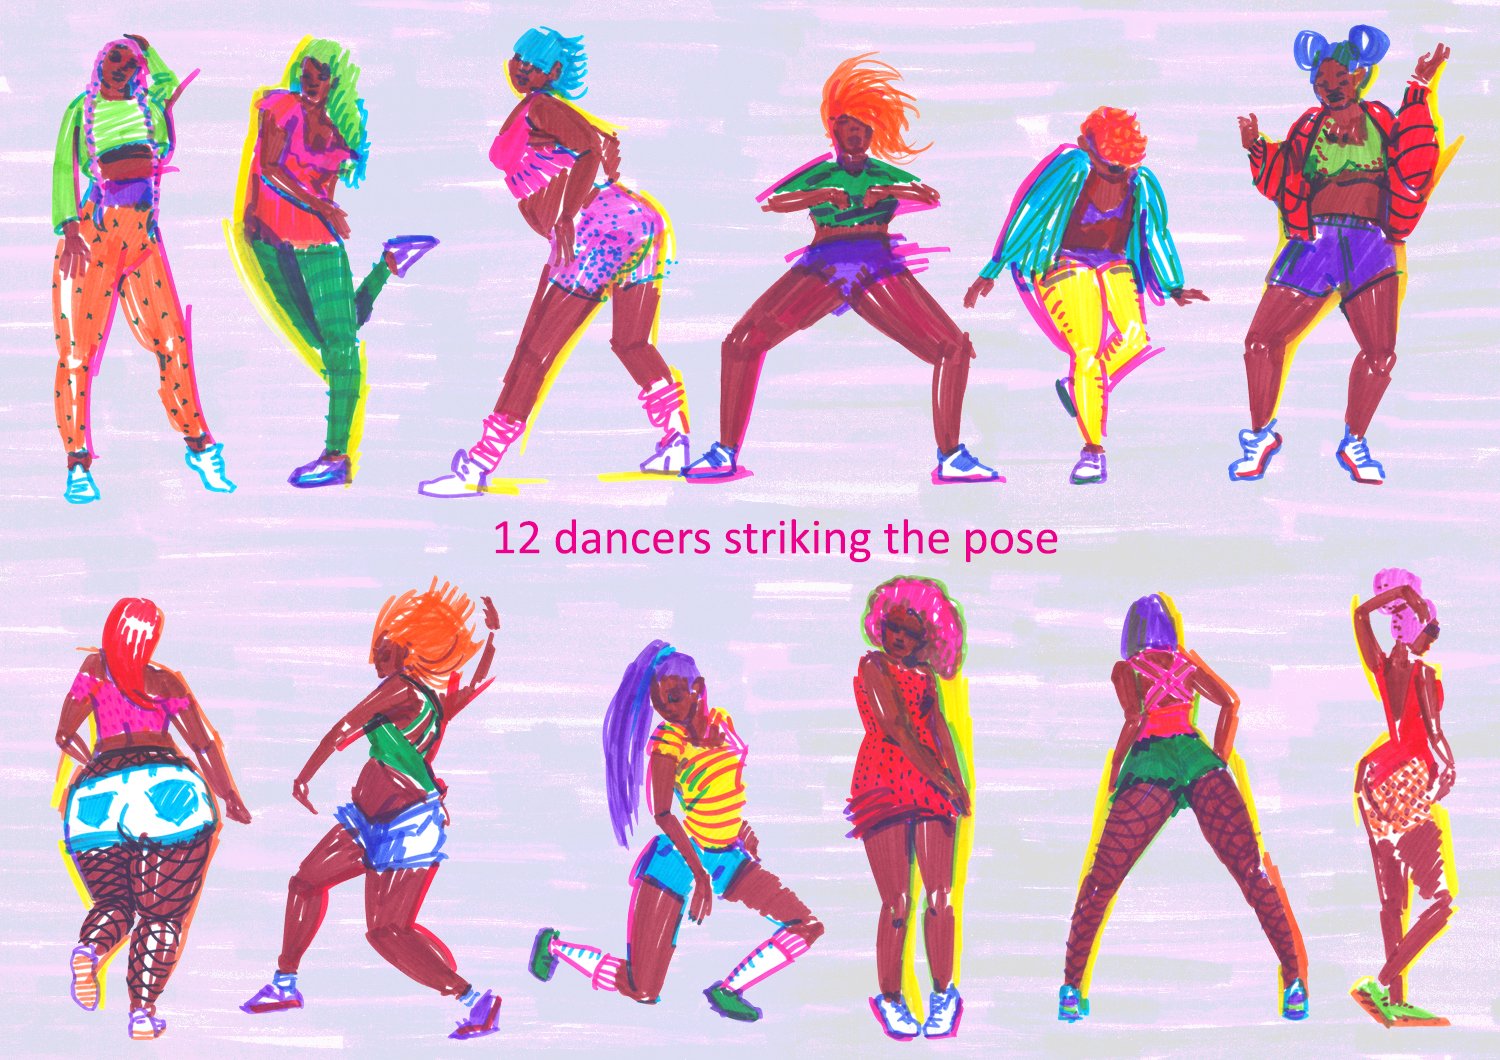 Strike the pose - dancers sketches preview image.